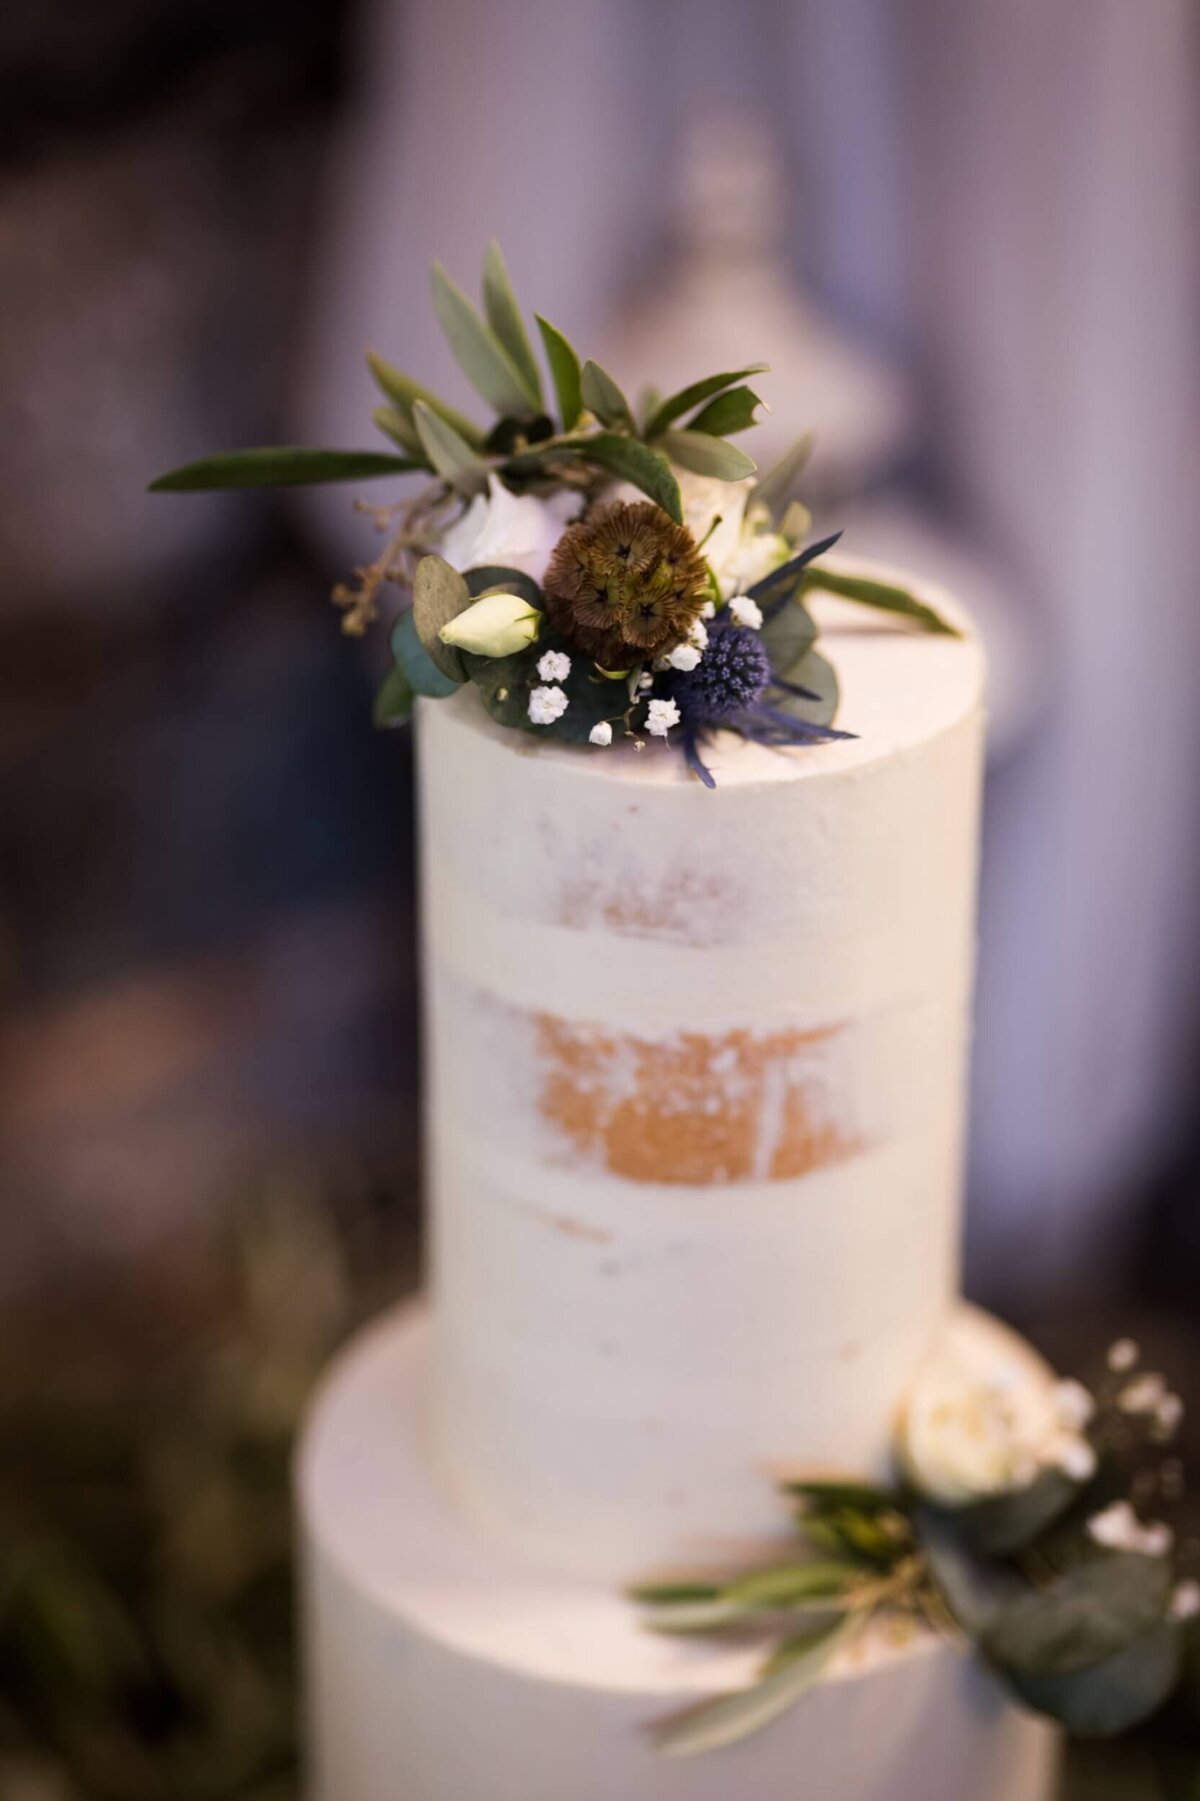 A wedding cake with flowers on top of it